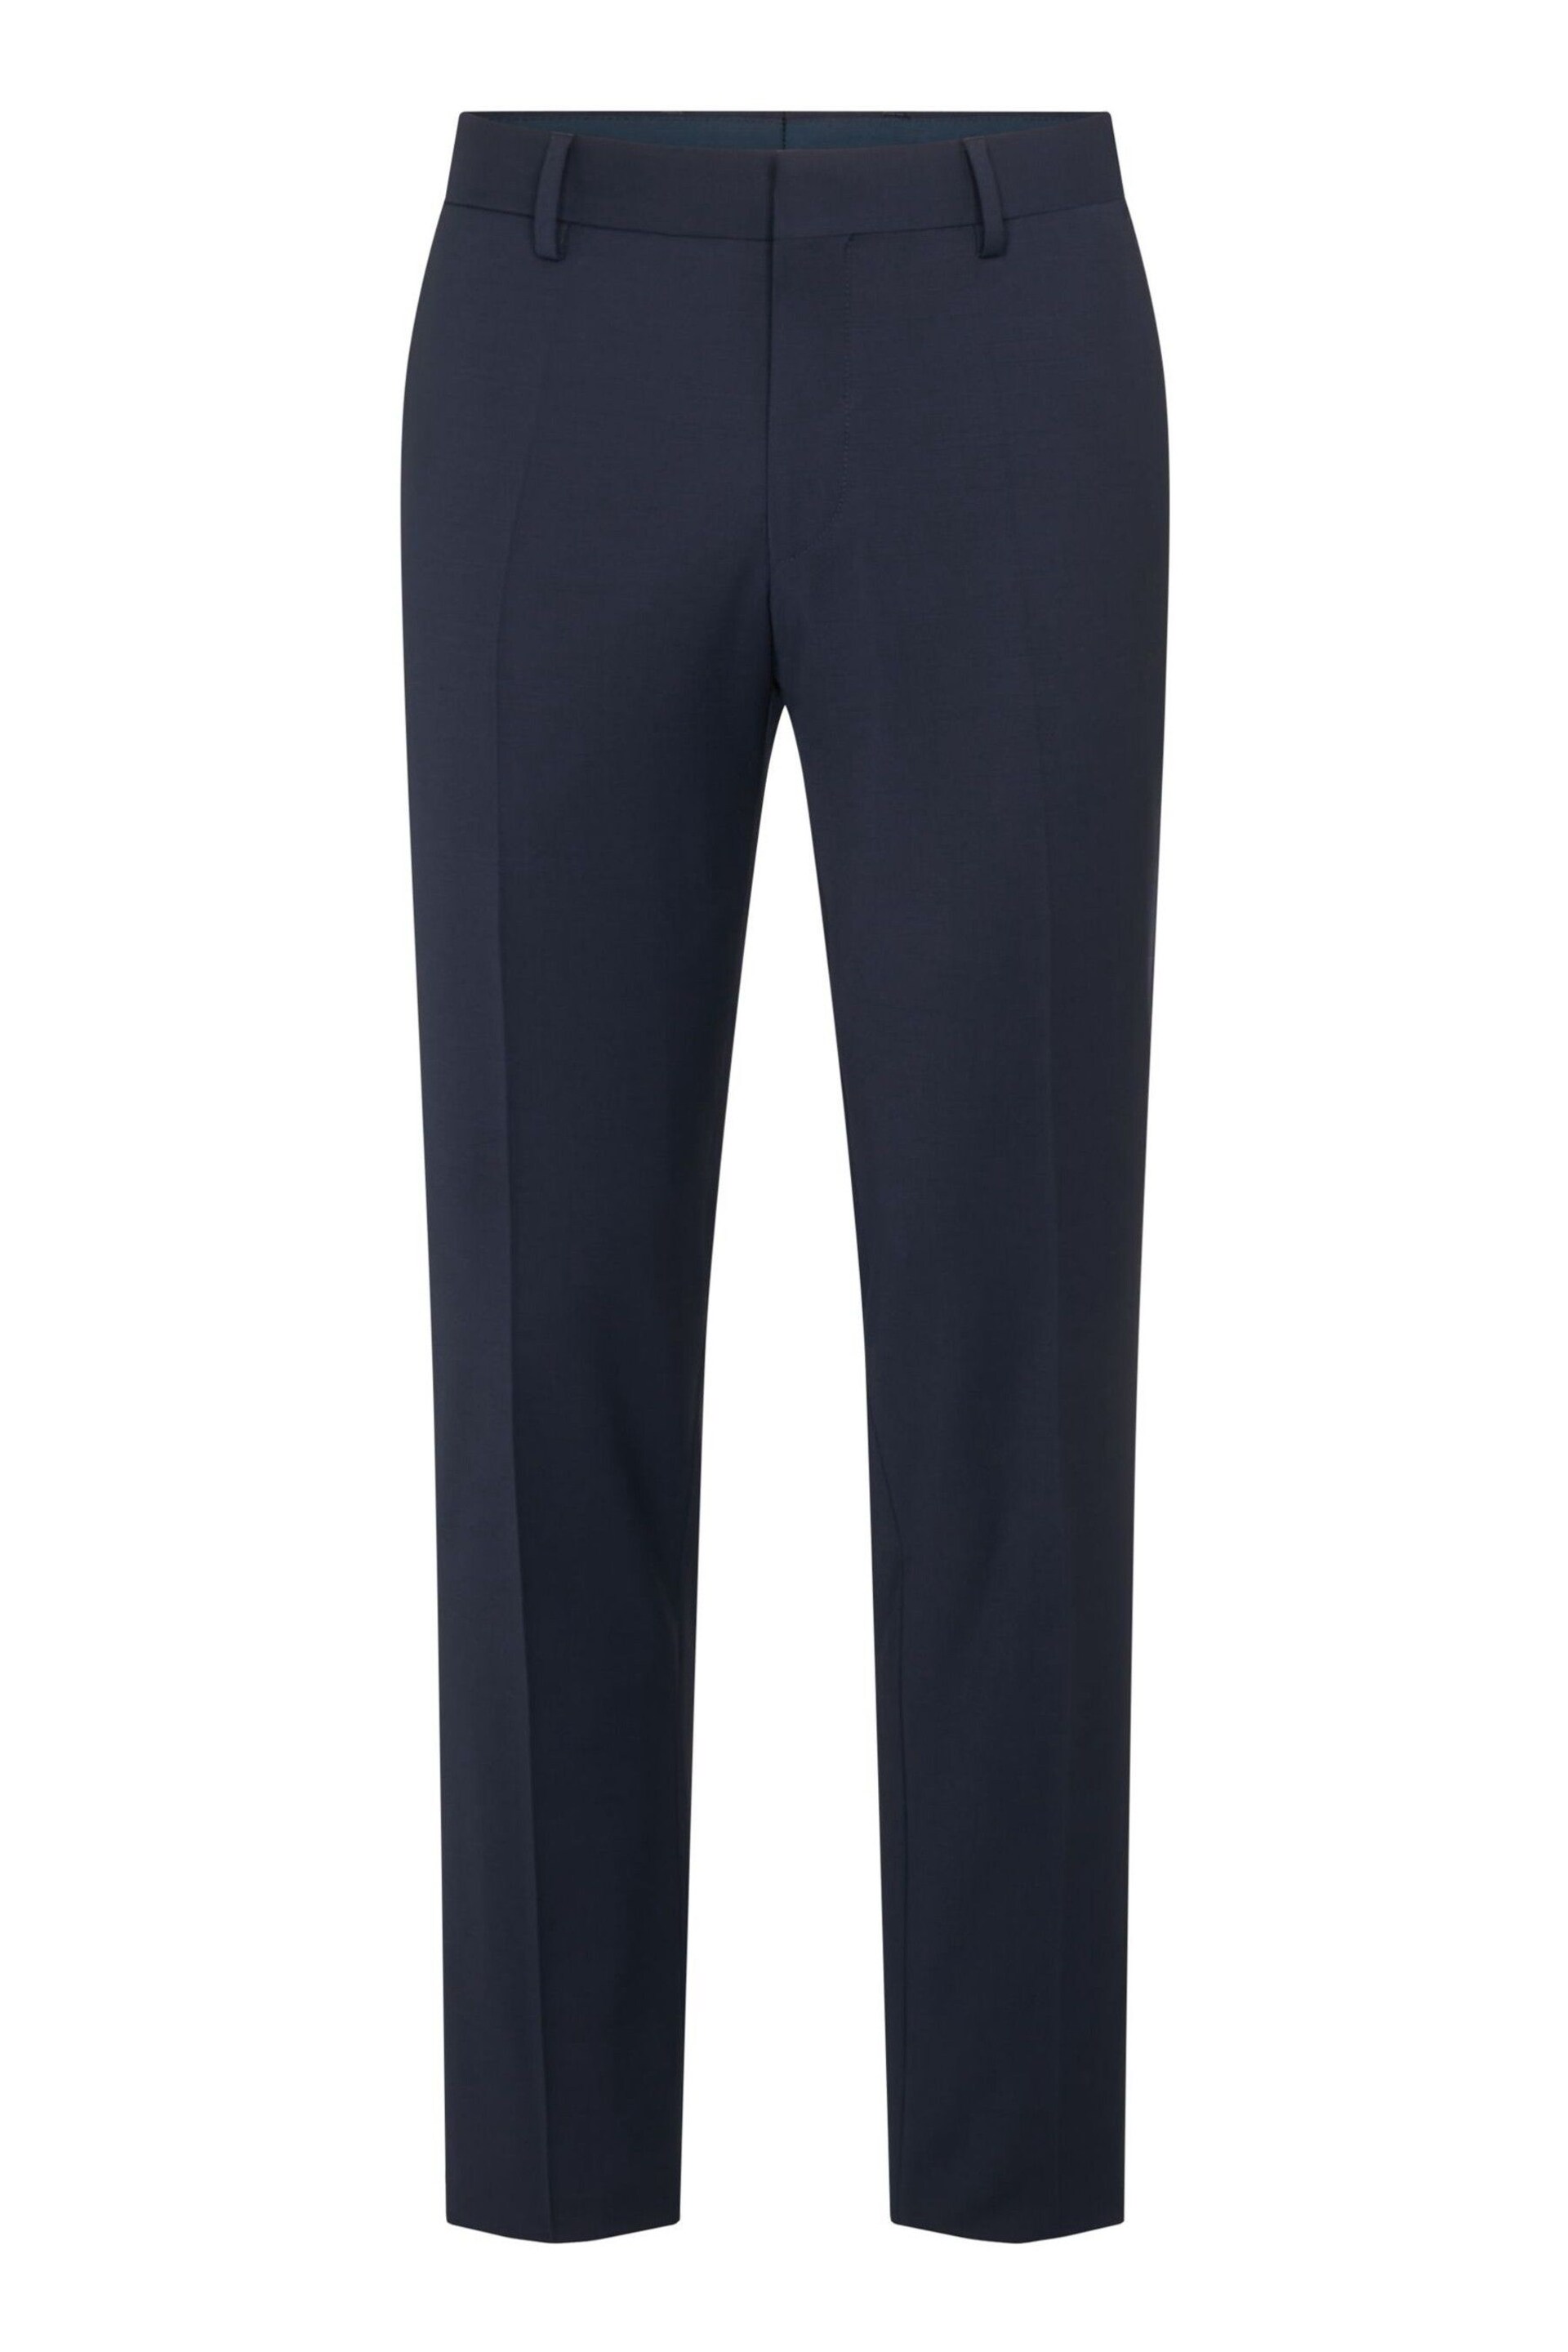 BOSS Blue Slim Fit Suit :Trousers - Image 5 of 7